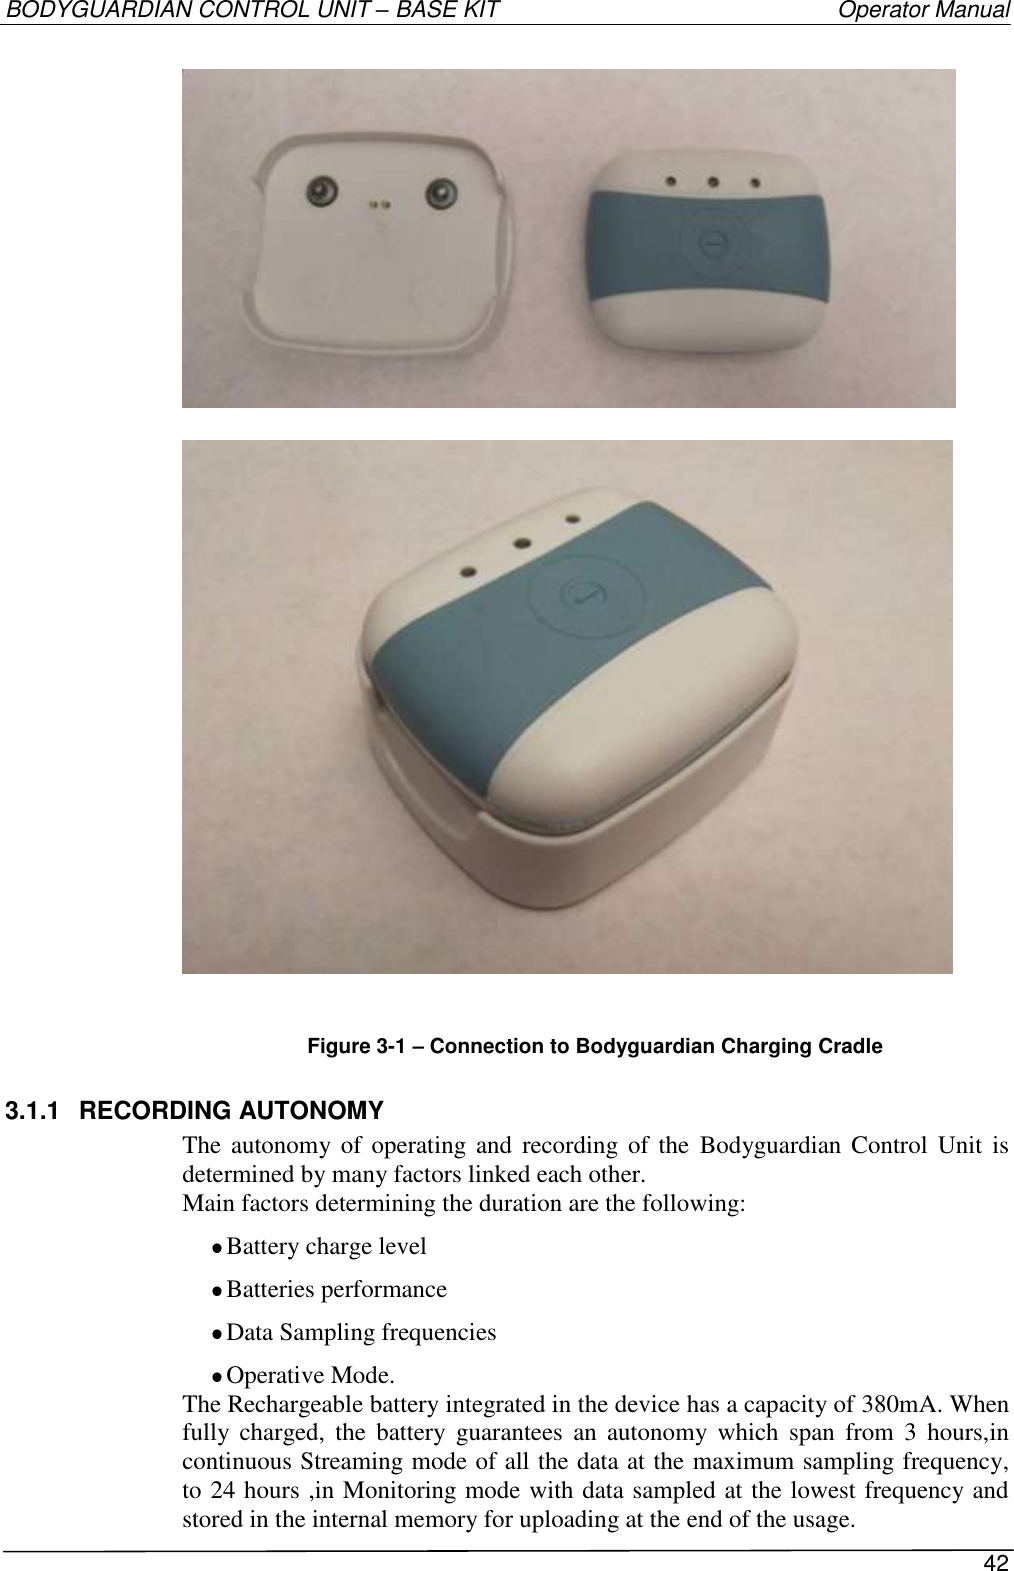 BODYGUARDIAN CONTROL UNIT – BASE KIT   Operator Manual 42      Figure 3-1 – Connection to Bodyguardian Charging Cradle 3.1.1  RECORDING AUTONOMY The autonomy of  operating  and  recording of  the  Bodyguardian Control  Unit is determined by many factors linked each other. Main factors determining the duration are the following:  Battery charge level  Batteries performance  Data Sampling frequencies  Operative Mode. The Rechargeable battery integrated in the device has a capacity of 380mA. When fully  charged, the  battery  guarantees  an  autonomy  which  span  from  3  hours,in continuous Streaming mode of all the data at the maximum sampling frequency, to 24 hours ,in Monitoring mode with data sampled at the lowest frequency and stored in the internal memory for uploading at the end of the usage. 